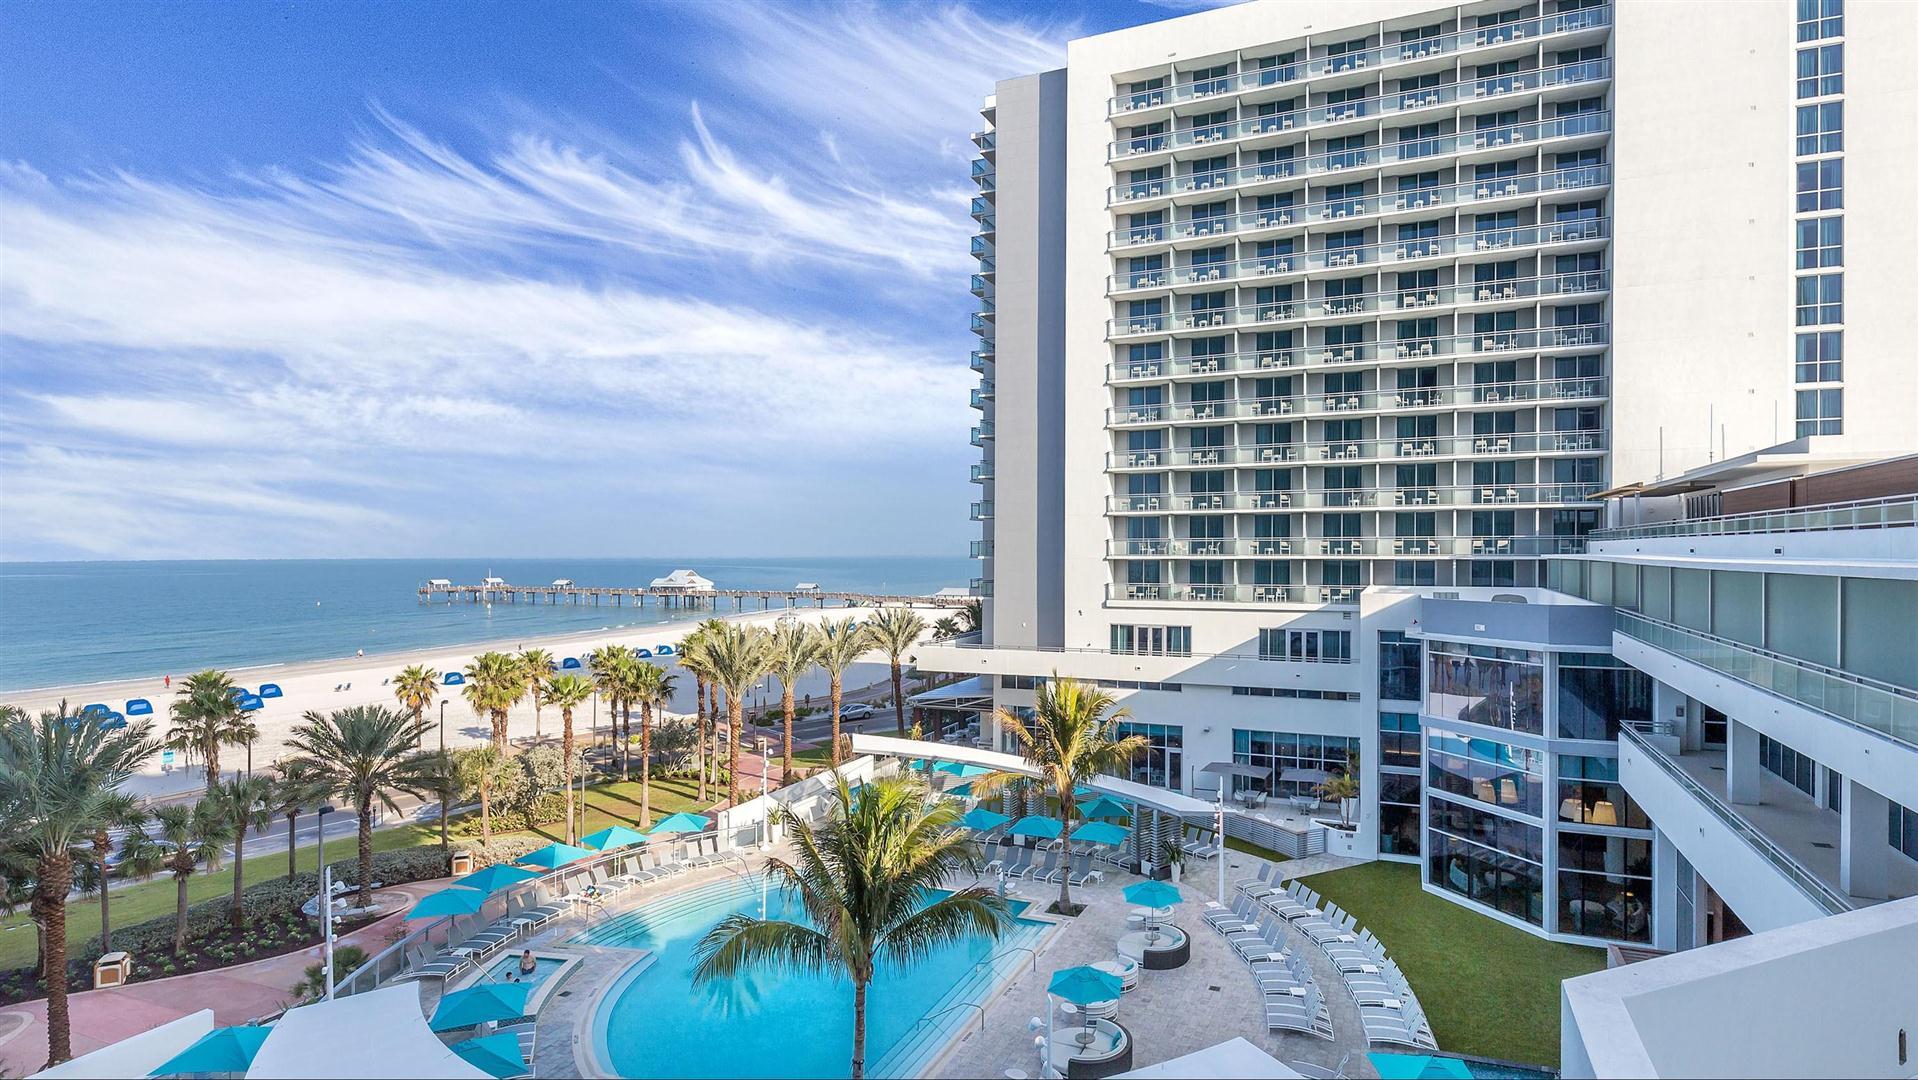 Wyndham Grand Clearwater Beach, a Wyndham Meetings Collection Hotel in Clearwater Beach, FL